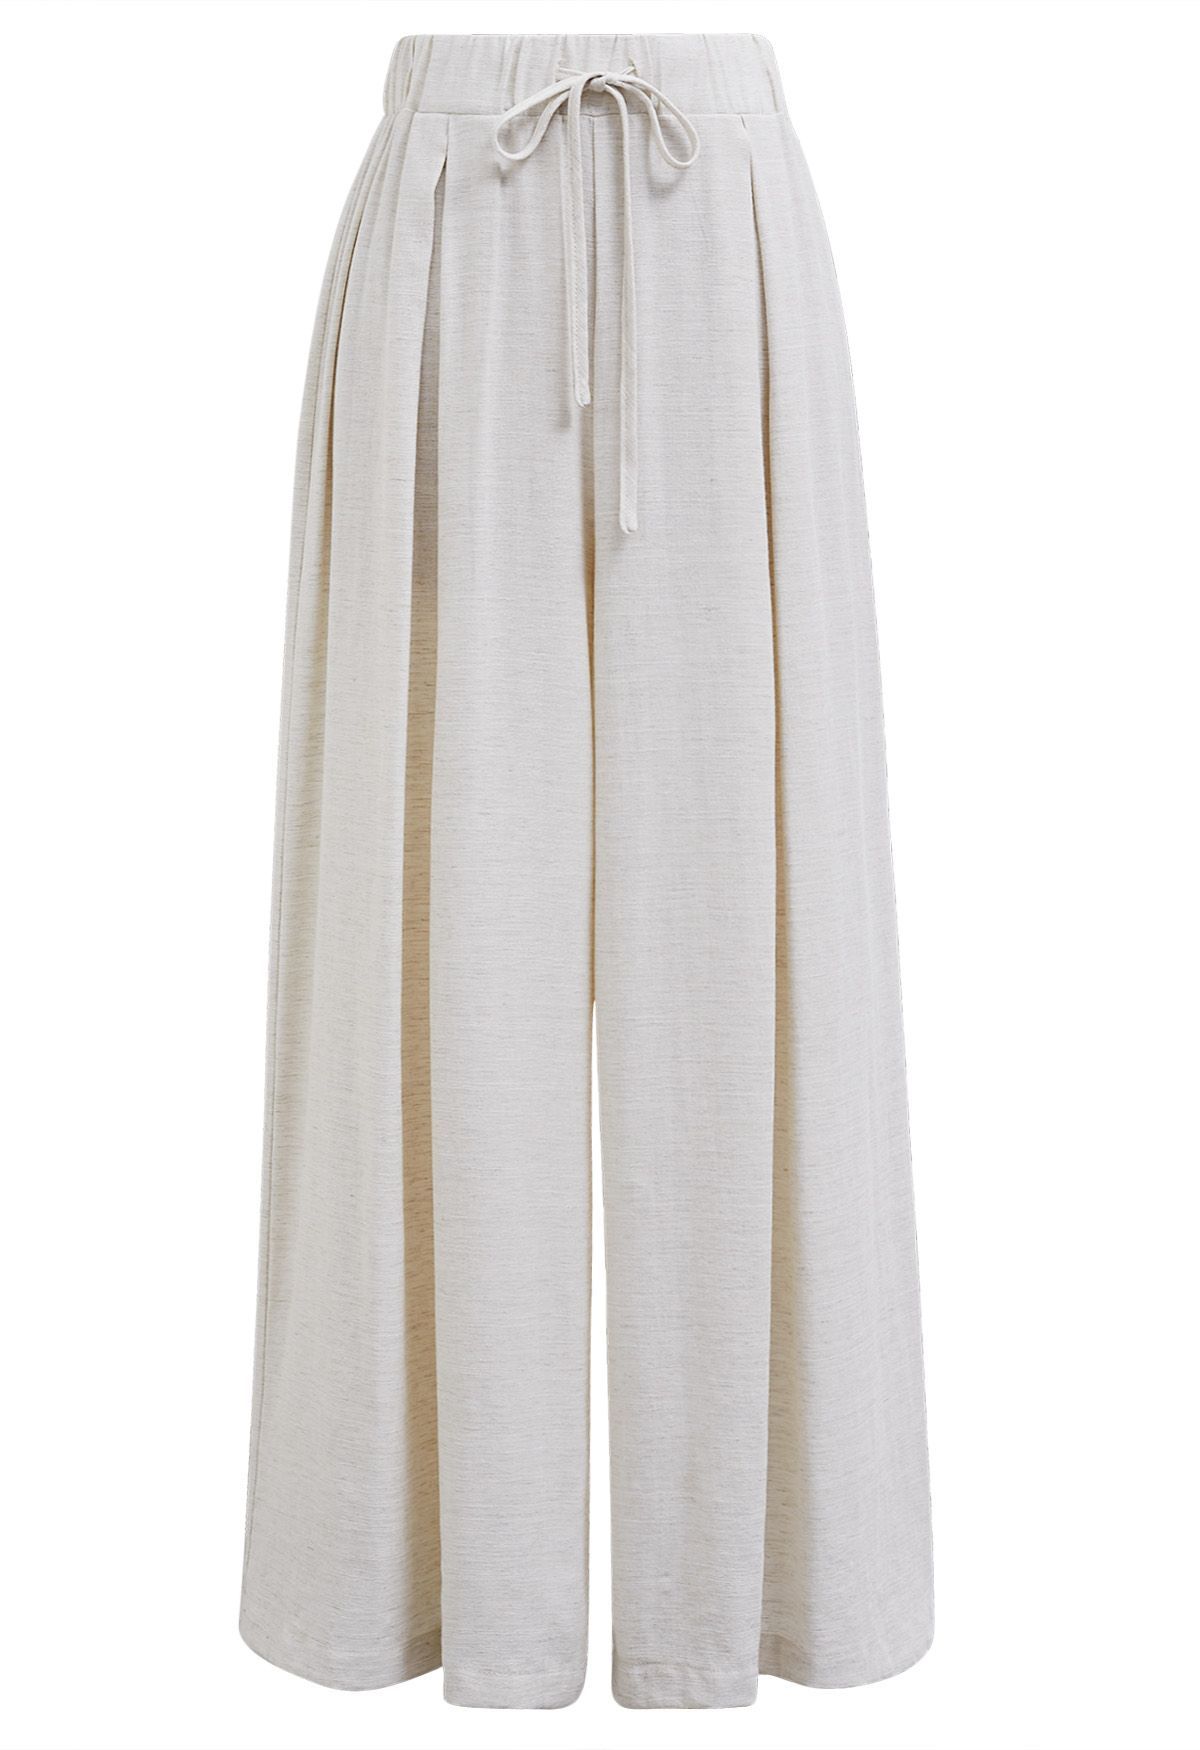 Casual Season Pleated Linen-Blend Pants in Linen | Chicwish